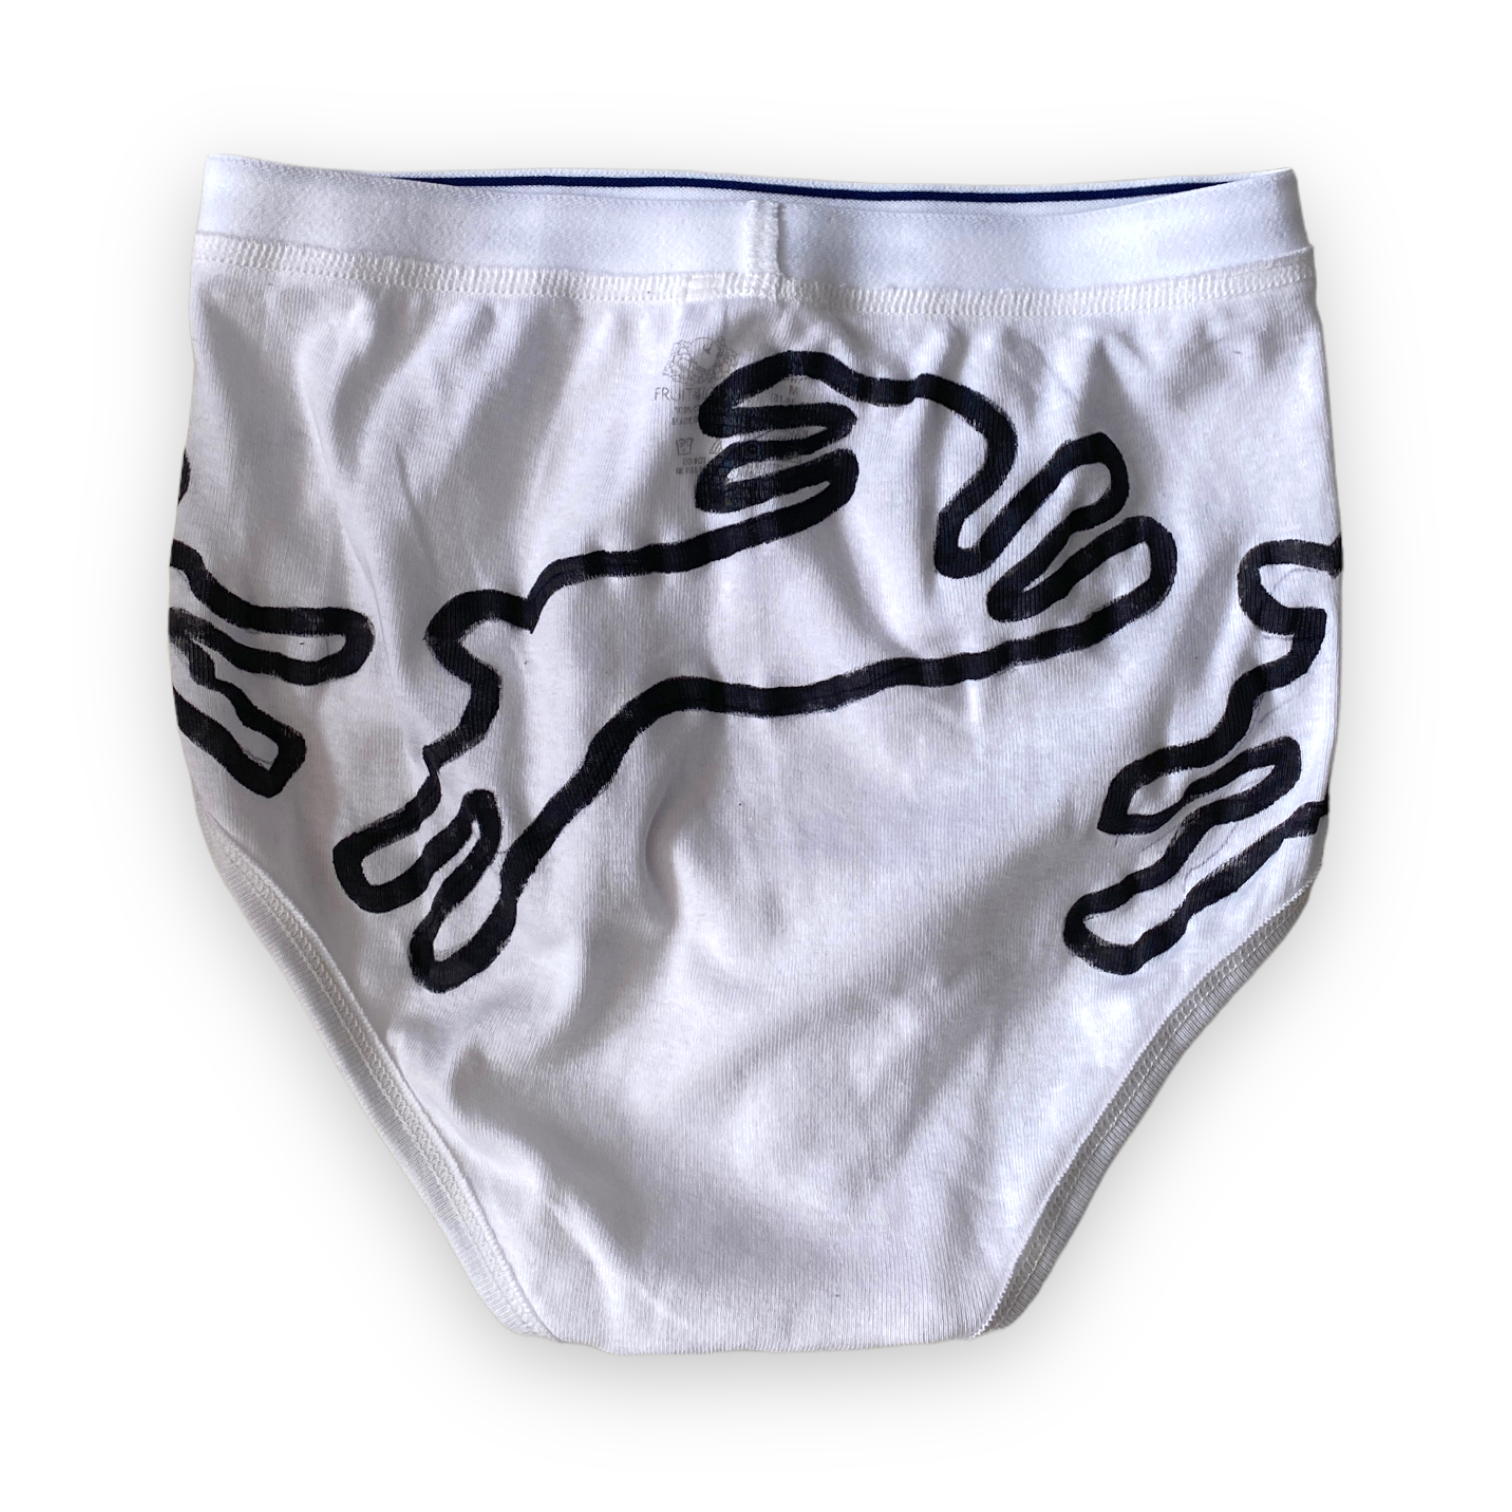 LEAPING RABBITS painted briefs